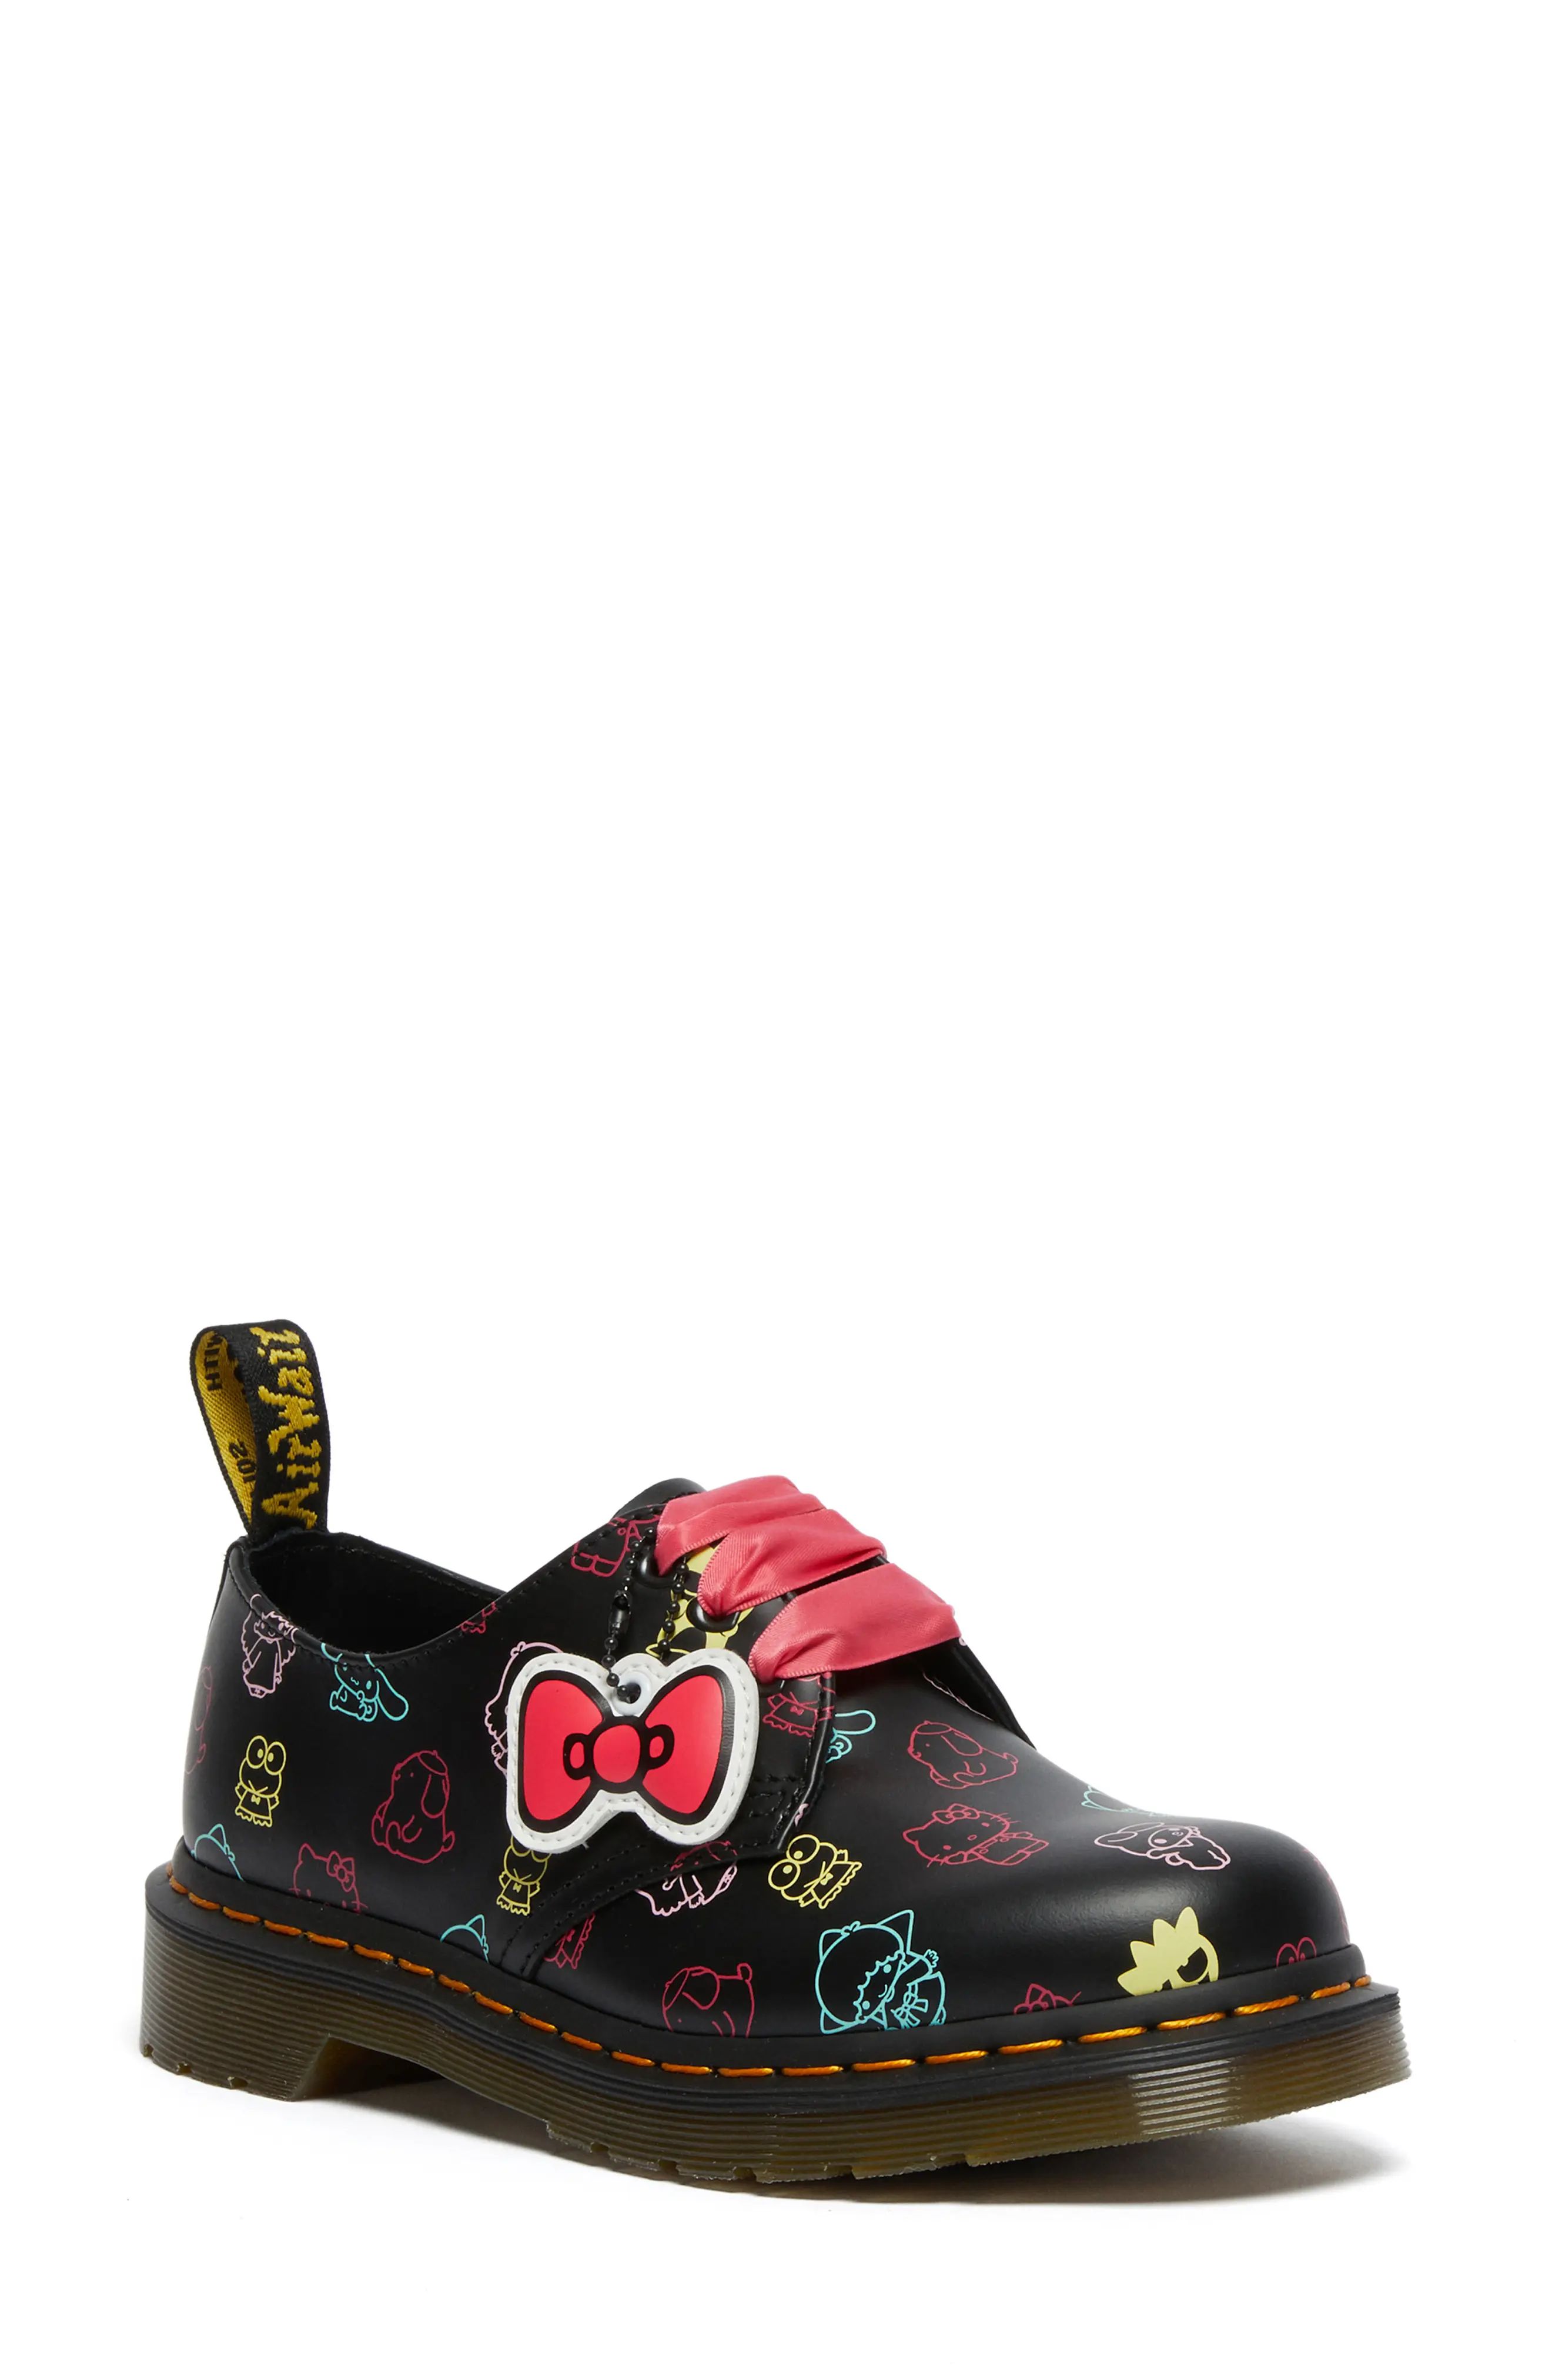 Women's Dr. Martens X Hello Kitty And Friends Derby, Size 5US/ 3UK - Black | Nordstrom